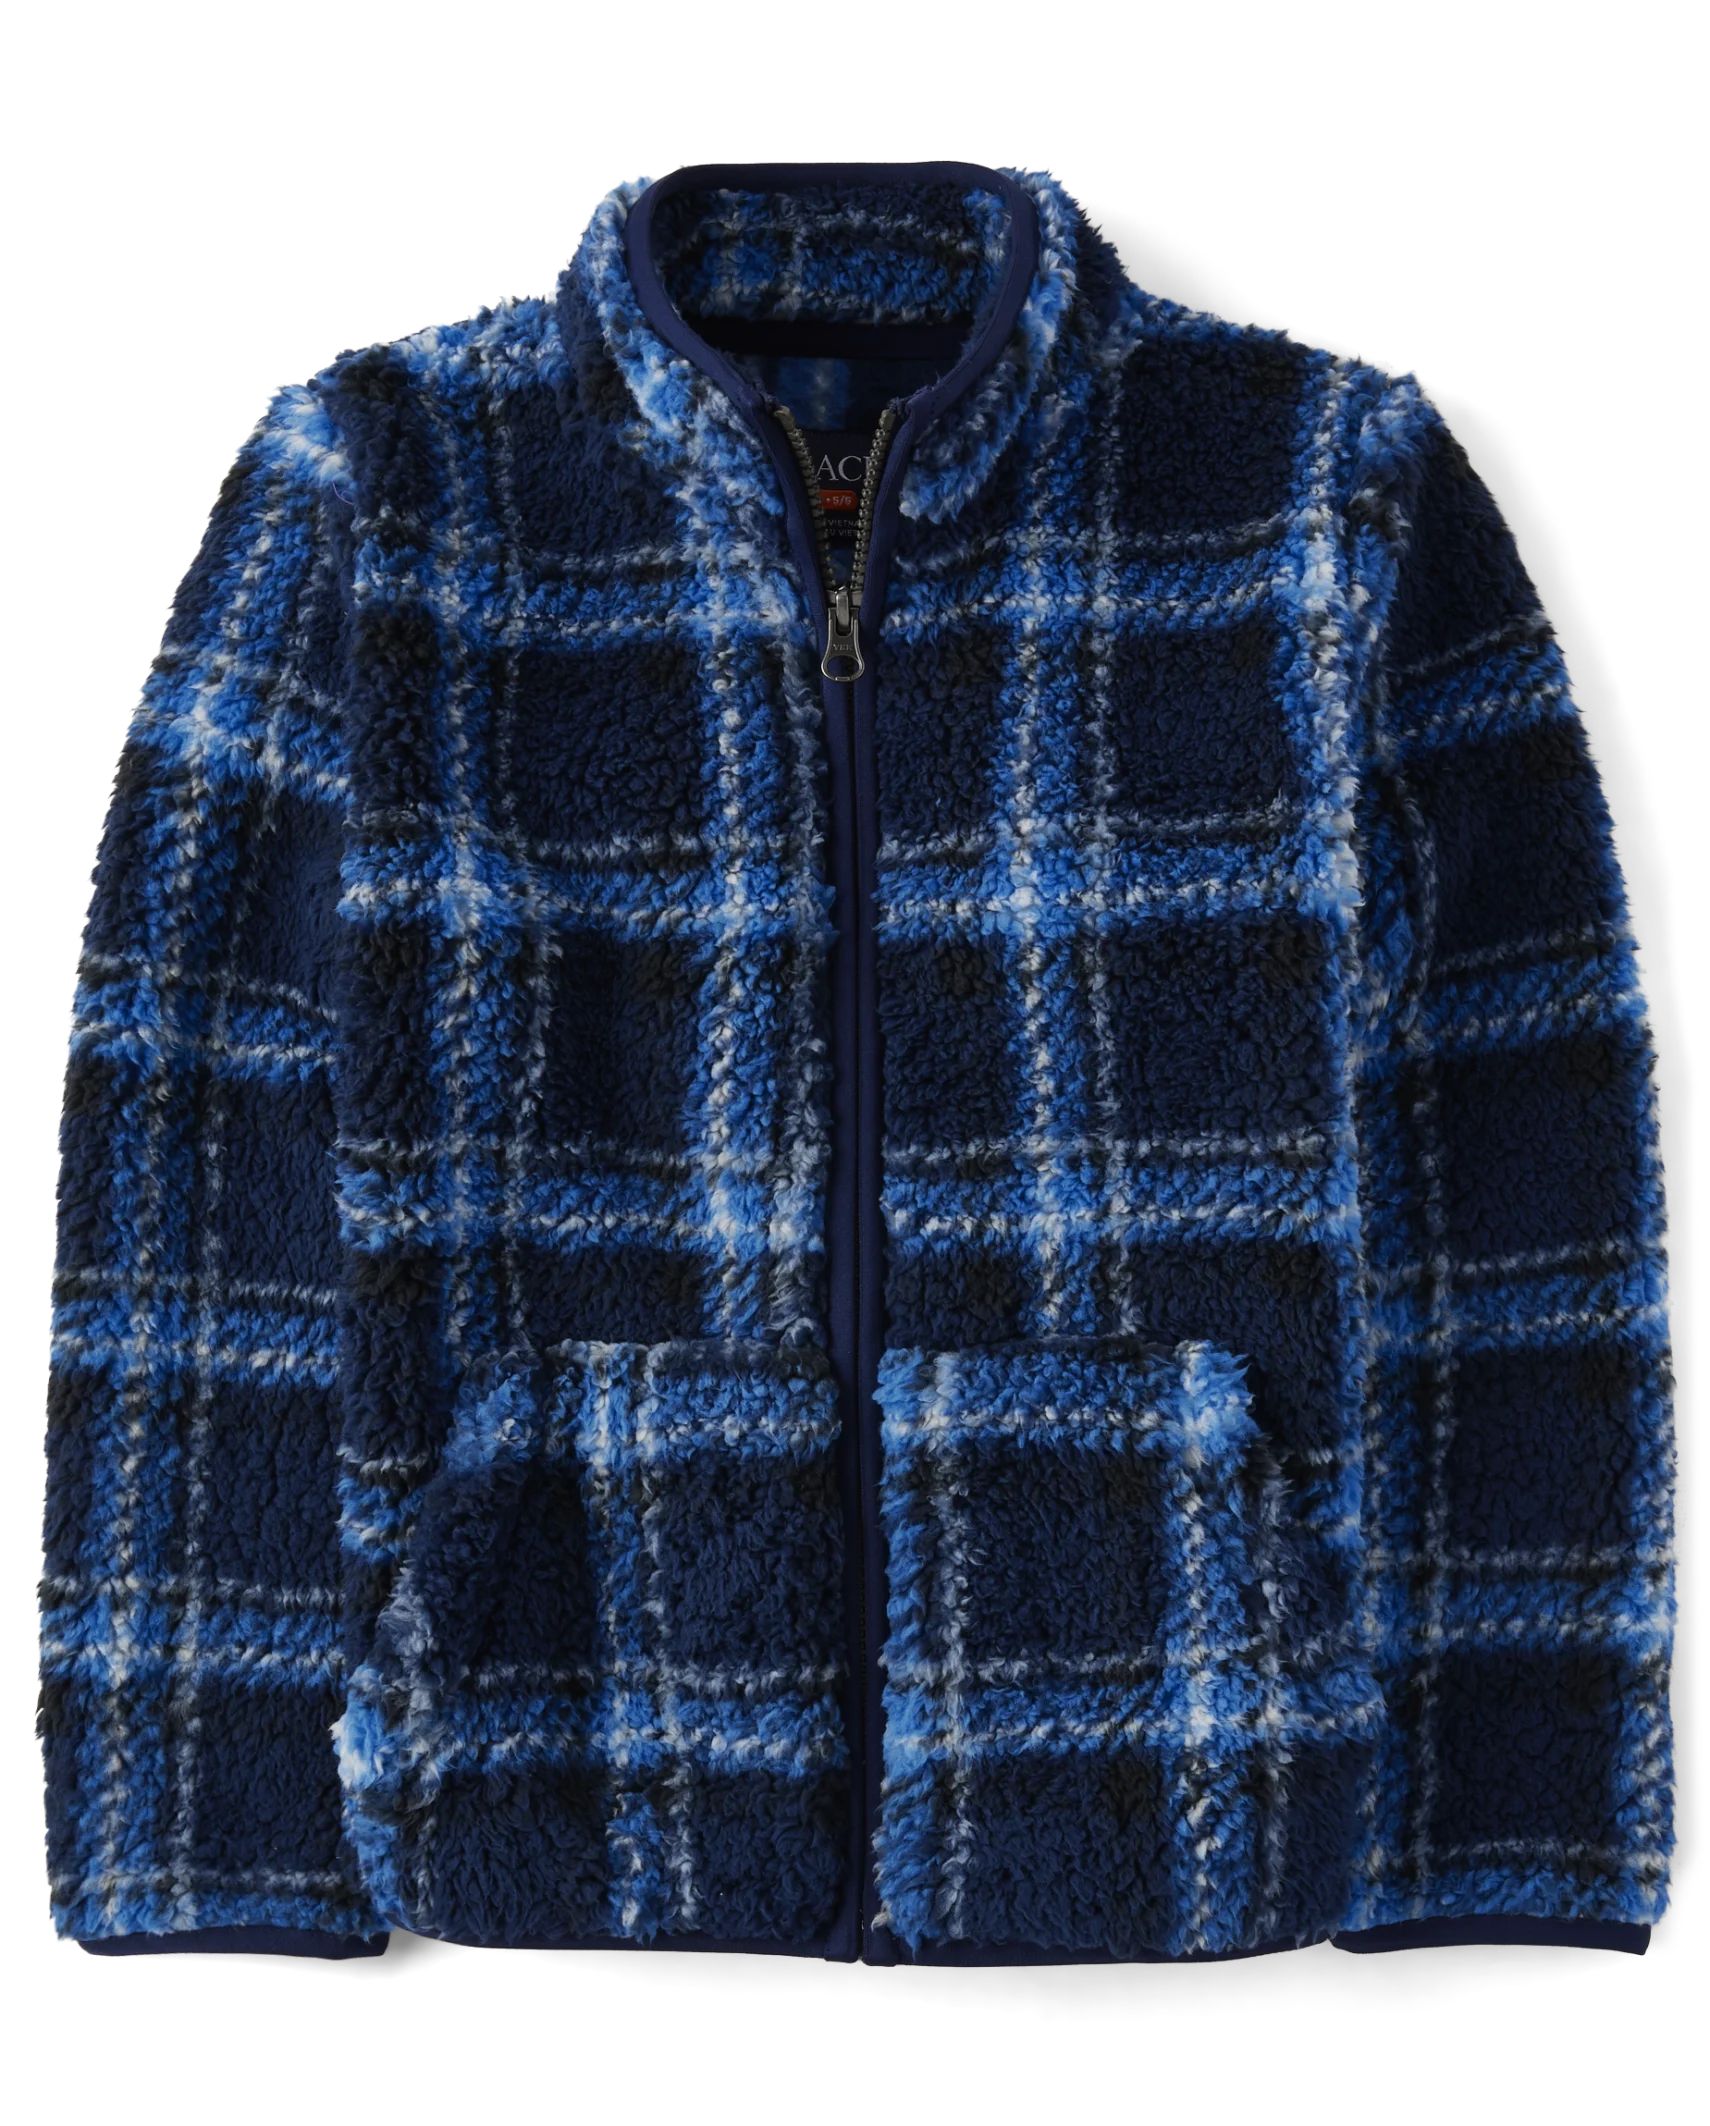 Boys Print Sherpa Zip-Up Jacket - tidal | The Children's Place